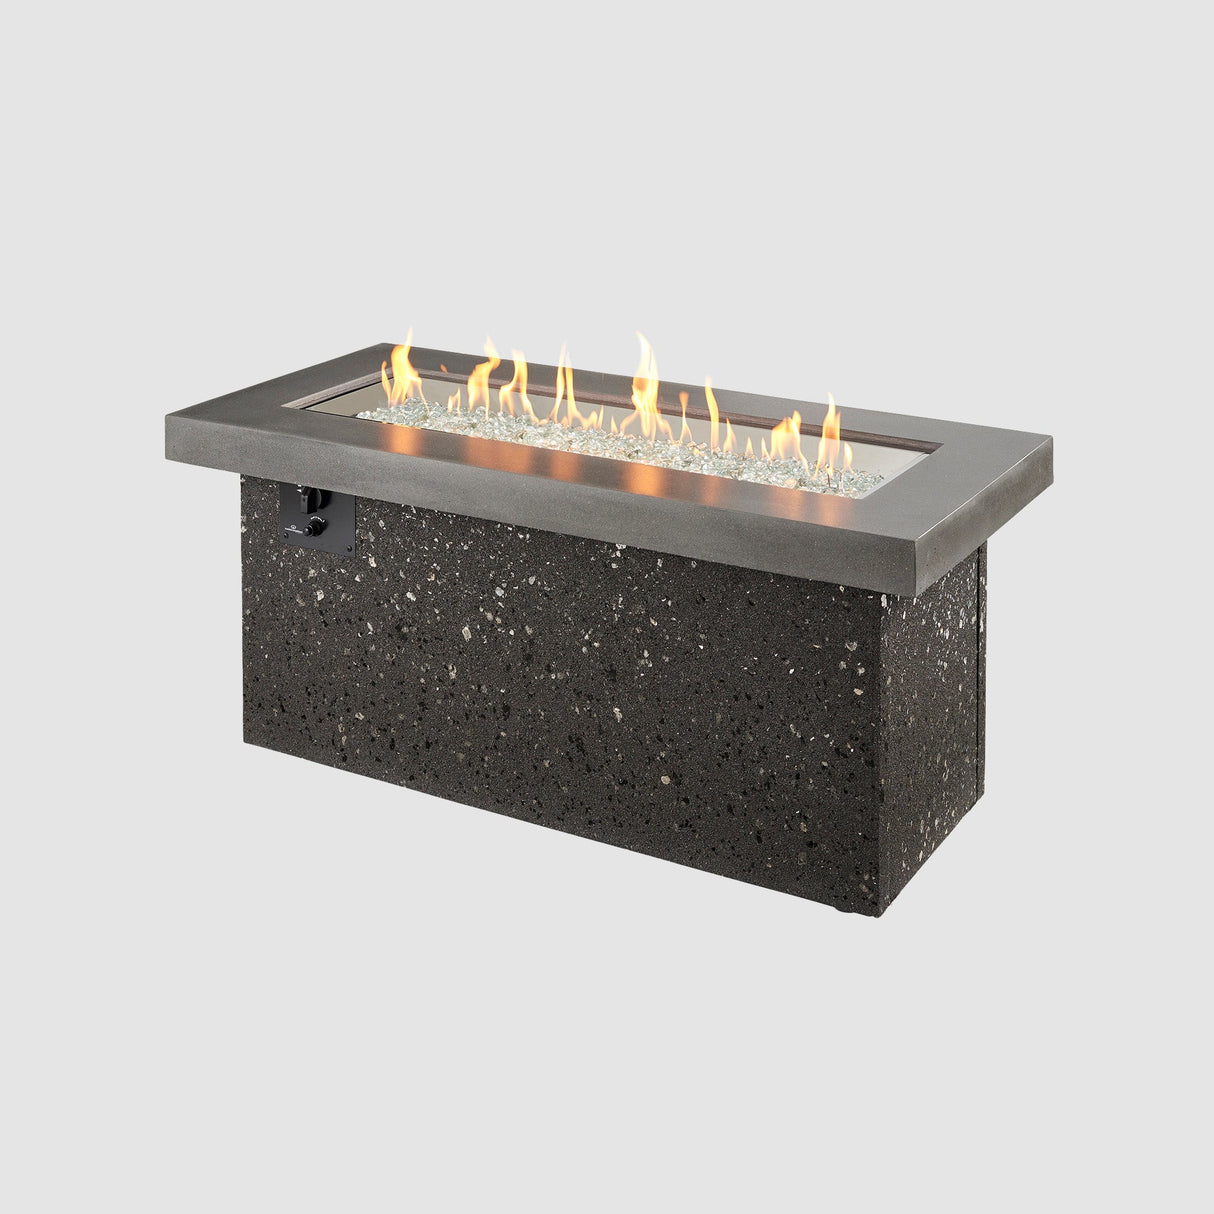 Midnight Mist Key Largo Linear Gas Fire Pit Table on a grey background